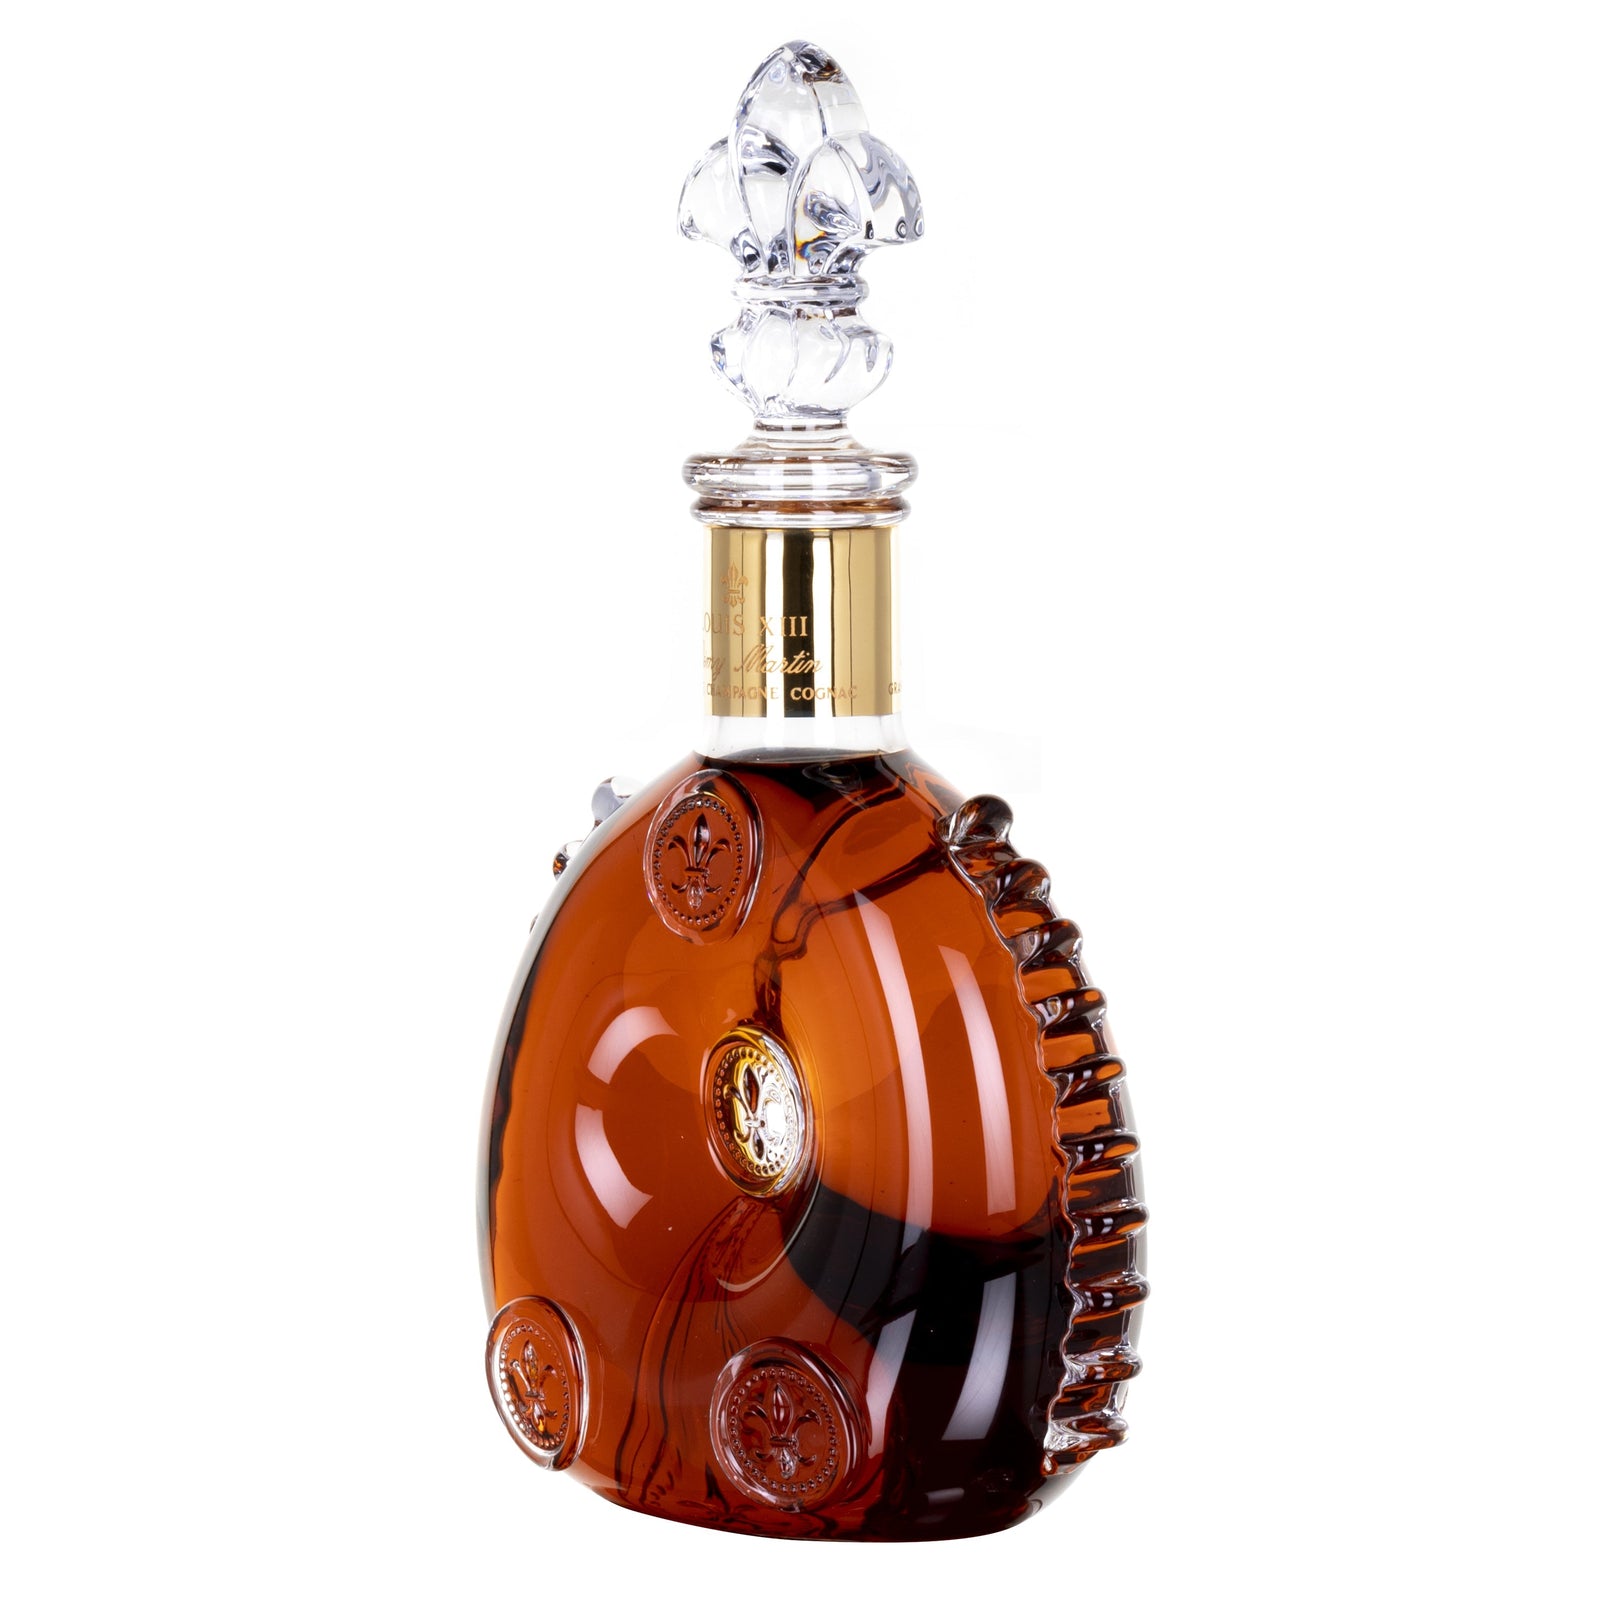 The Classic Decanter